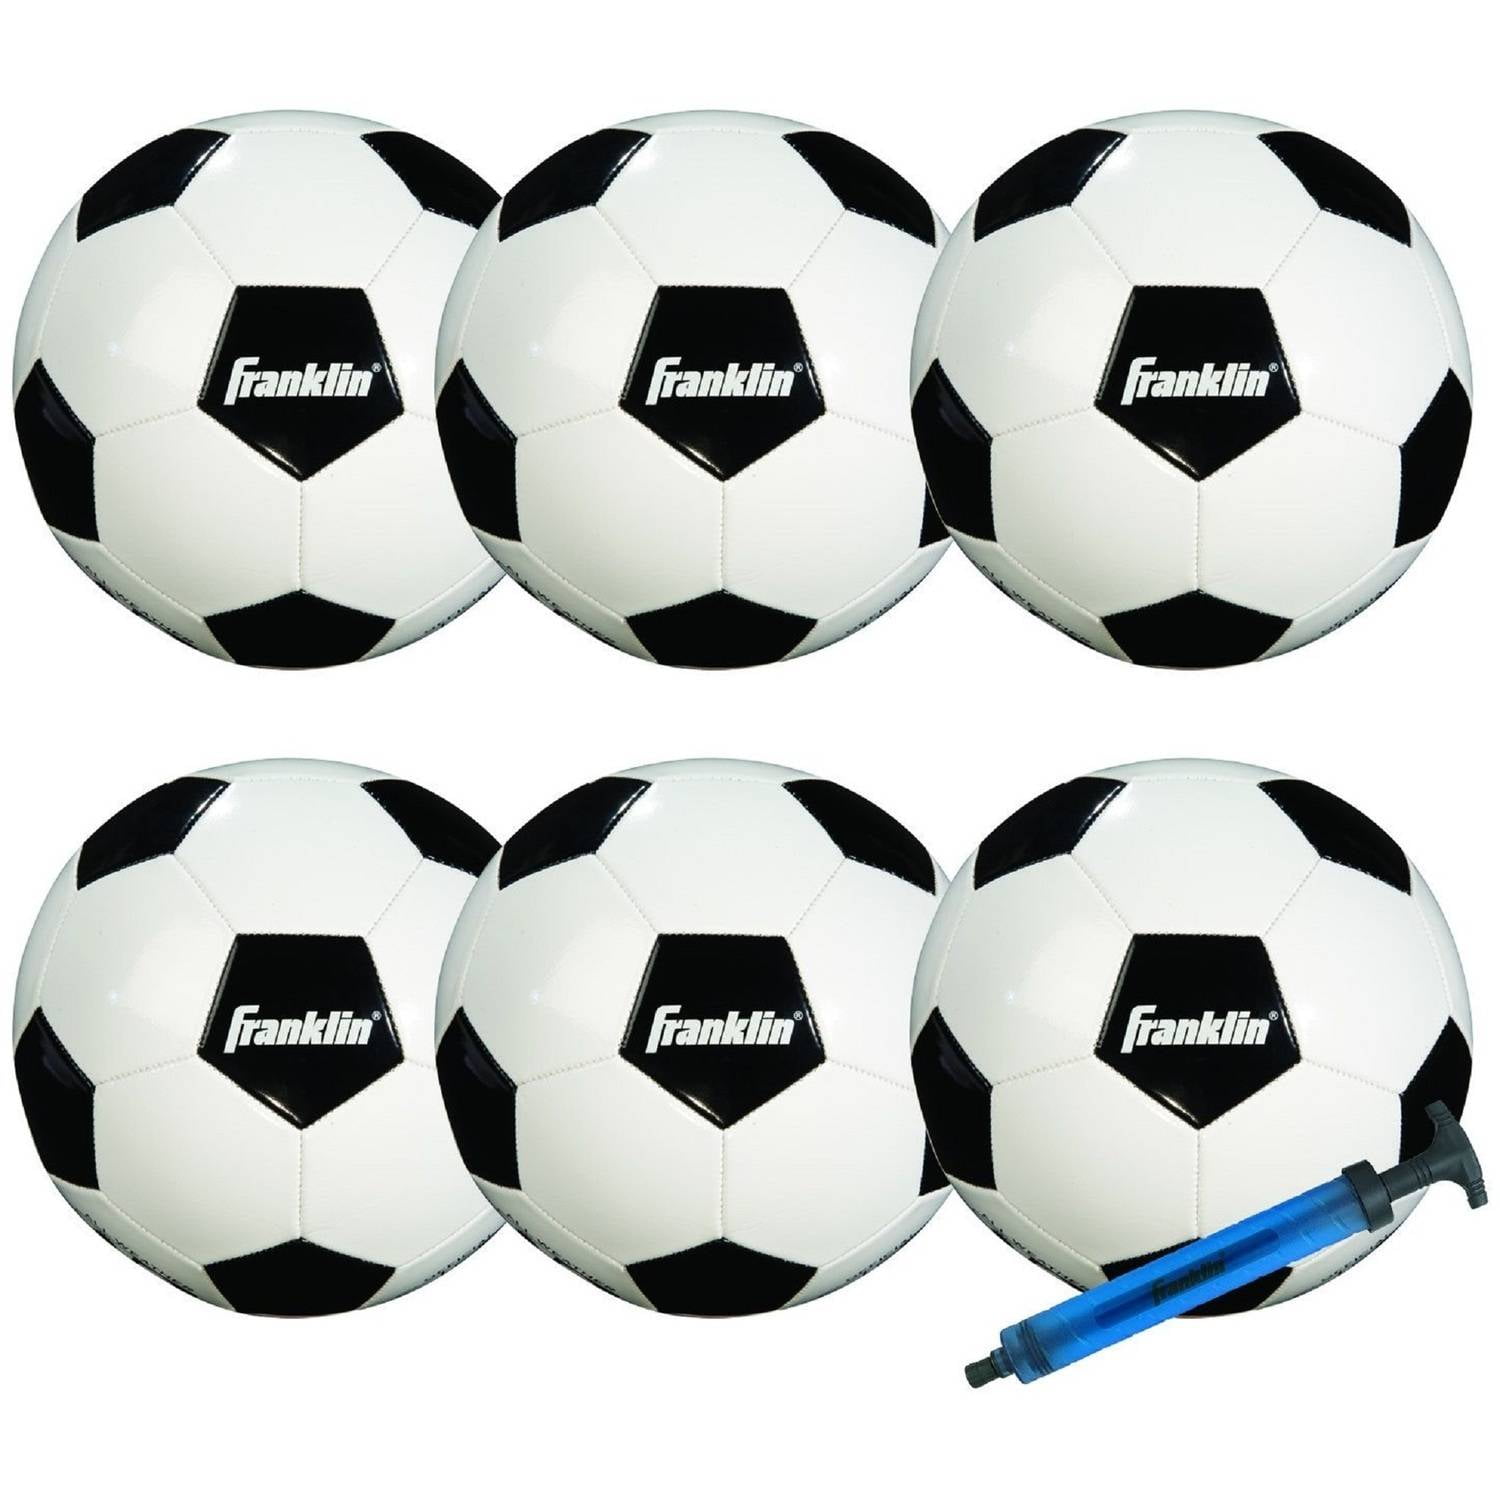 14.98 NEW  2019  precision rio  football  INDOOR BALL Sizes 4 and 5   FREEPOST 